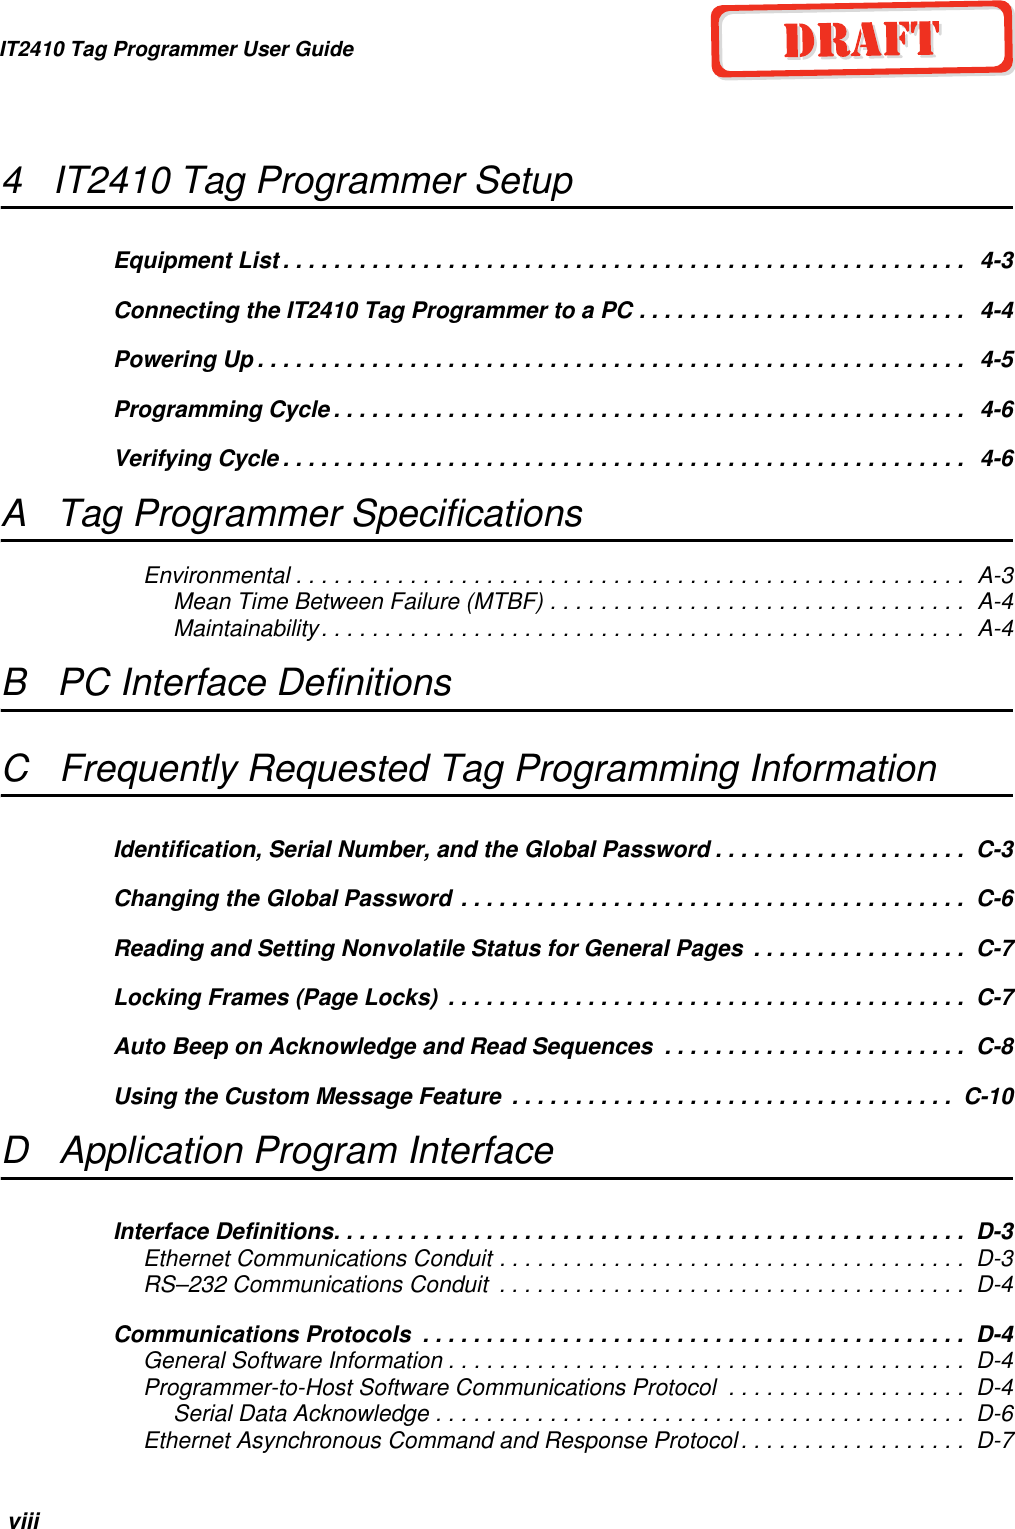 IT2410 Tag Programmer User Guide viii4   IT2410 Tag Programmer SetupEquipment List . . . . . . . . . . . . . . . . . . . . . . . . . . . . . . . . . . . . . . . . . . . . . . . . . . . . . .   4-3Connecting the IT2410 Tag Programmer to a PC . . . . . . . . . . . . . . . . . . . . . . . . . .   4-4Powering Up . . . . . . . . . . . . . . . . . . . . . . . . . . . . . . . . . . . . . . . . . . . . . . . . . . . . . . . .   4-5Programming Cycle . . . . . . . . . . . . . . . . . . . . . . . . . . . . . . . . . . . . . . . . . . . . . . . . . .   4-6Verifying Cycle . . . . . . . . . . . . . . . . . . . . . . . . . . . . . . . . . . . . . . . . . . . . . . . . . . . . . .   4-6A   Tag Programmer SpecificationsEnvironmental . . . . . . . . . . . . . . . . . . . . . . . . . . . . . . . . . . . . . . . . . . . . . . . . . . . . .  A-3Mean Time Between Failure (MTBF) . . . . . . . . . . . . . . . . . . . . . . . . . . . . . . . . .  A-4Maintainability. . . . . . . . . . . . . . . . . . . . . . . . . . . . . . . . . . . . . . . . . . . . . . . . . . .  A-4B   PC Interface DefinitionsC   Frequently Requested Tag Programming InformationIdentification, Serial Number, and the Global Password . . . . . . . . . . . . . . . . . . . .  C-3Changing the Global Password . . . . . . . . . . . . . . . . . . . . . . . . . . . . . . . . . . . . . . . .  C-6Reading and Setting Nonvolatile Status for General Pages  . . . . . . . . . . . . . . . . .  C-7Locking Frames (Page Locks)  . . . . . . . . . . . . . . . . . . . . . . . . . . . . . . . . . . . . . . . . .  C-7Auto Beep on Acknowledge and Read Sequences  . . . . . . . . . . . . . . . . . . . . . . . .  C-8Using the Custom Message Feature  . . . . . . . . . . . . . . . . . . . . . . . . . . . . . . . . . . .  C-10D   Application Program InterfaceInterface Definitions. . . . . . . . . . . . . . . . . . . . . . . . . . . . . . . . . . . . . . . . . . . . . . . . . .  D-3Ethernet Communications Conduit . . . . . . . . . . . . . . . . . . . . . . . . . . . . . . . . . . . . .  D-3RS–232 Communications Conduit  . . . . . . . . . . . . . . . . . . . . . . . . . . . . . . . . . . . . .  D-4Communications Protocols  . . . . . . . . . . . . . . . . . . . . . . . . . . . . . . . . . . . . . . . . . . .  D-4General Software Information . . . . . . . . . . . . . . . . . . . . . . . . . . . . . . . . . . . . . . . . .  D-4Programmer-to-Host Software Communications Protocol  . . . . . . . . . . . . . . . . . . .  D-4Serial Data Acknowledge . . . . . . . . . . . . . . . . . . . . . . . . . . . . . . . . . . . . . . . . . .  D-6Ethernet Asynchronous Command and Response Protocol. . . . . . . . . . . . . . . . . .  D-7